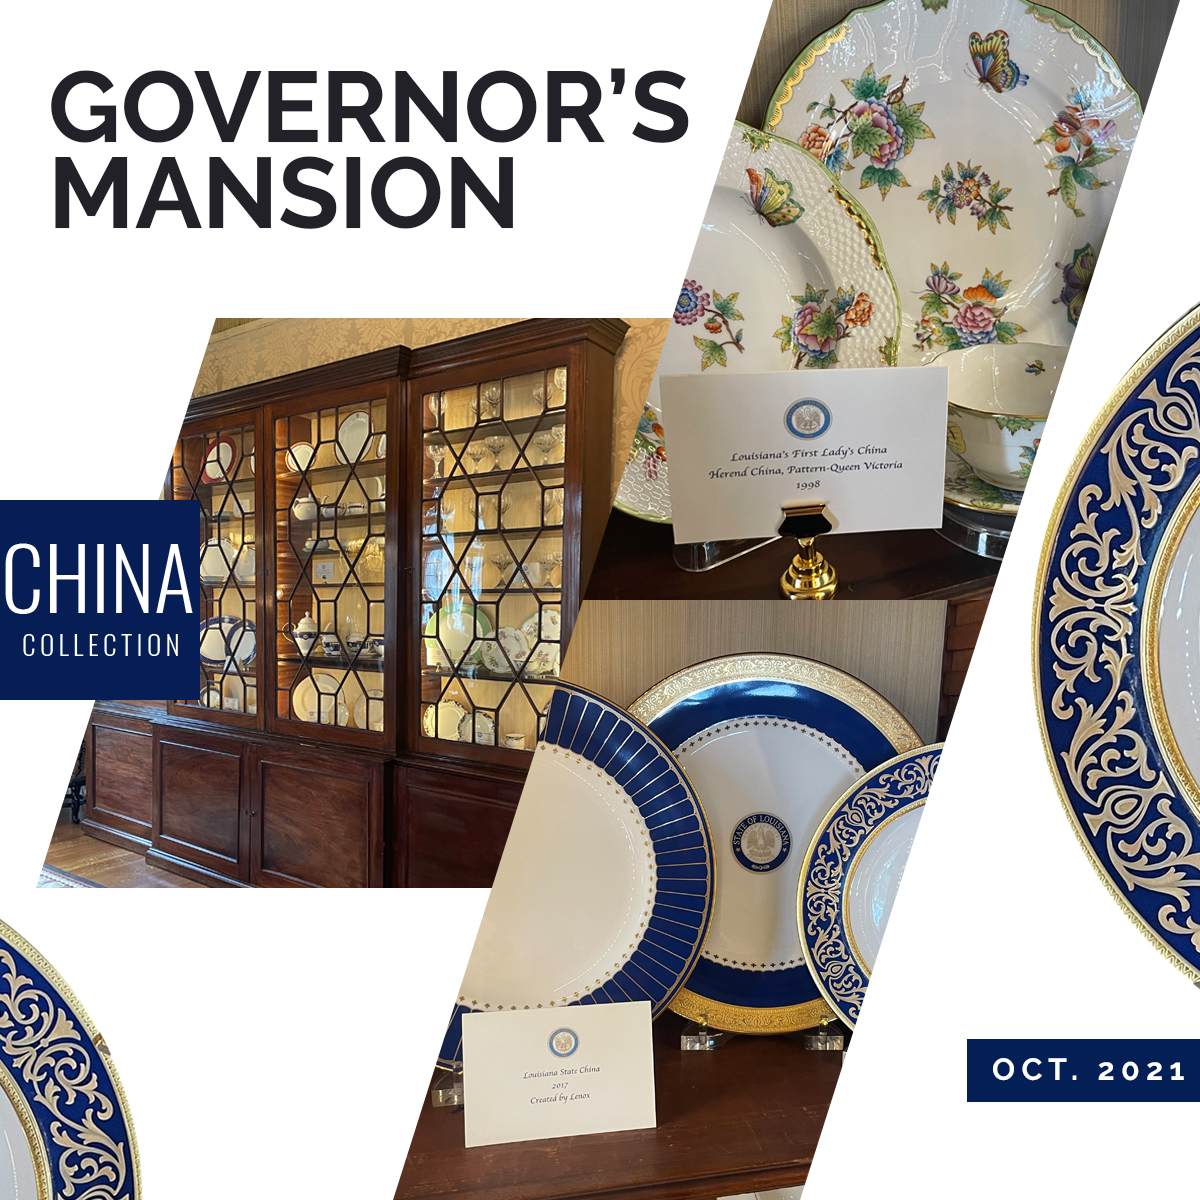 The Governor’s Mansion: China